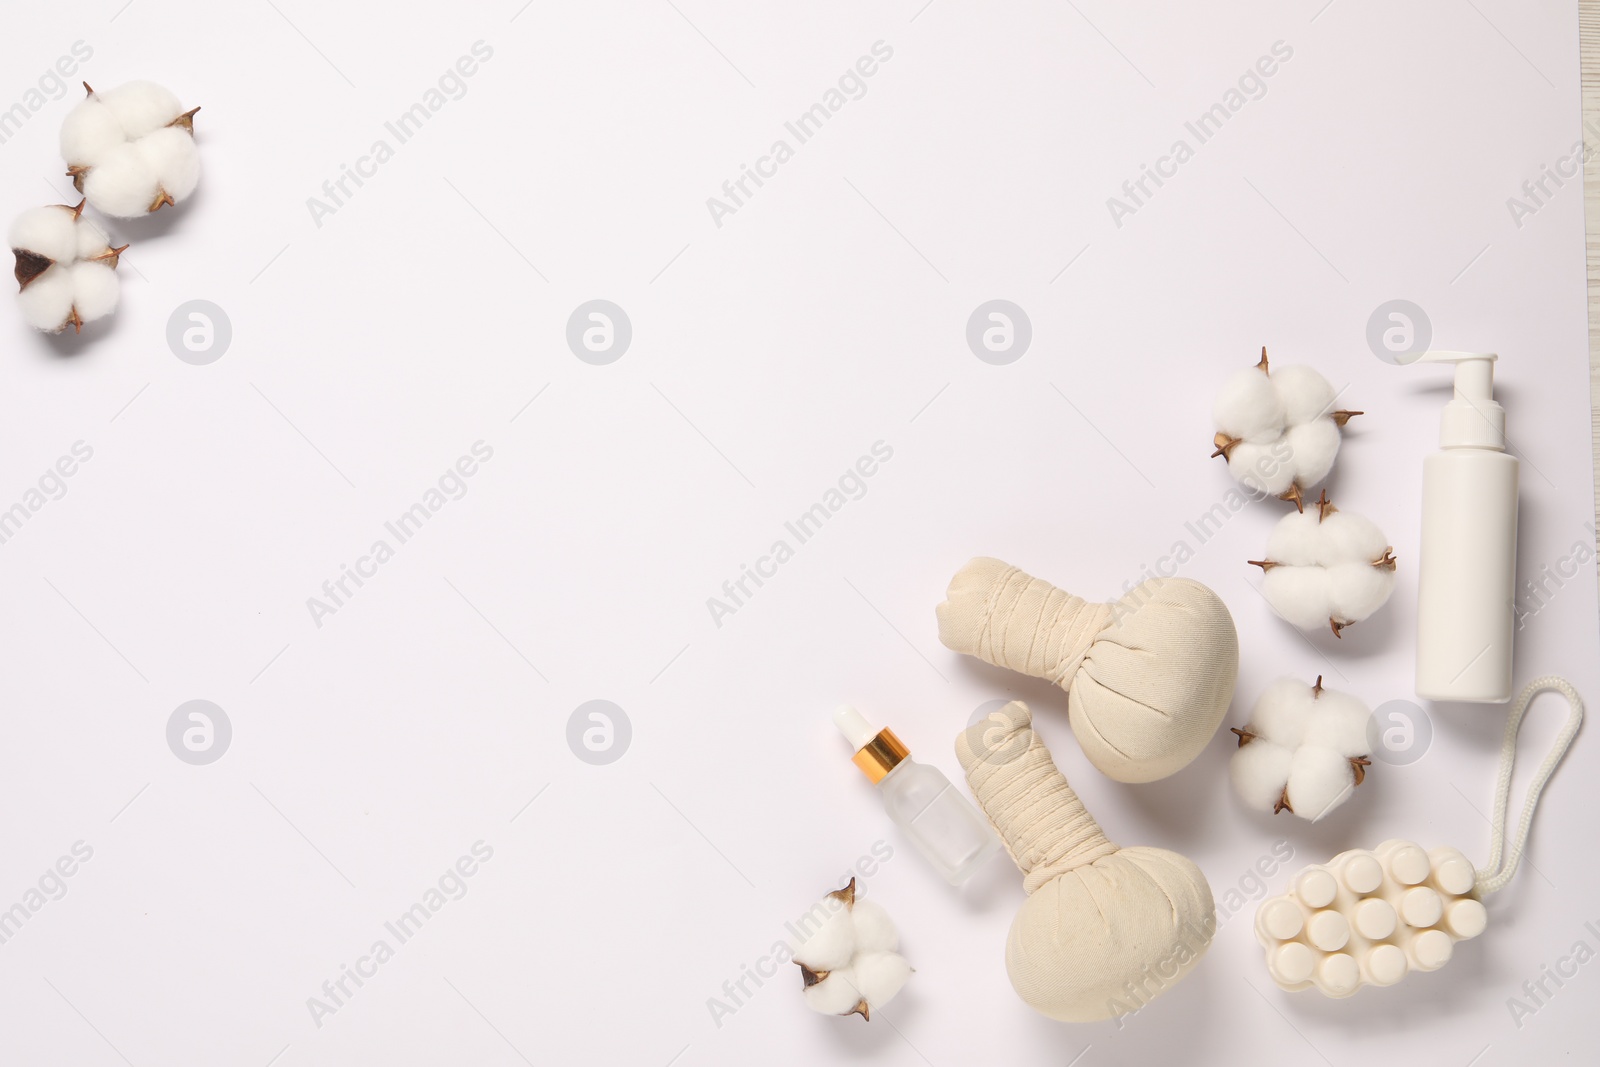 Photo of Bath accessories. Different personal care products and cotton flowers on white background, flat lay with space for text